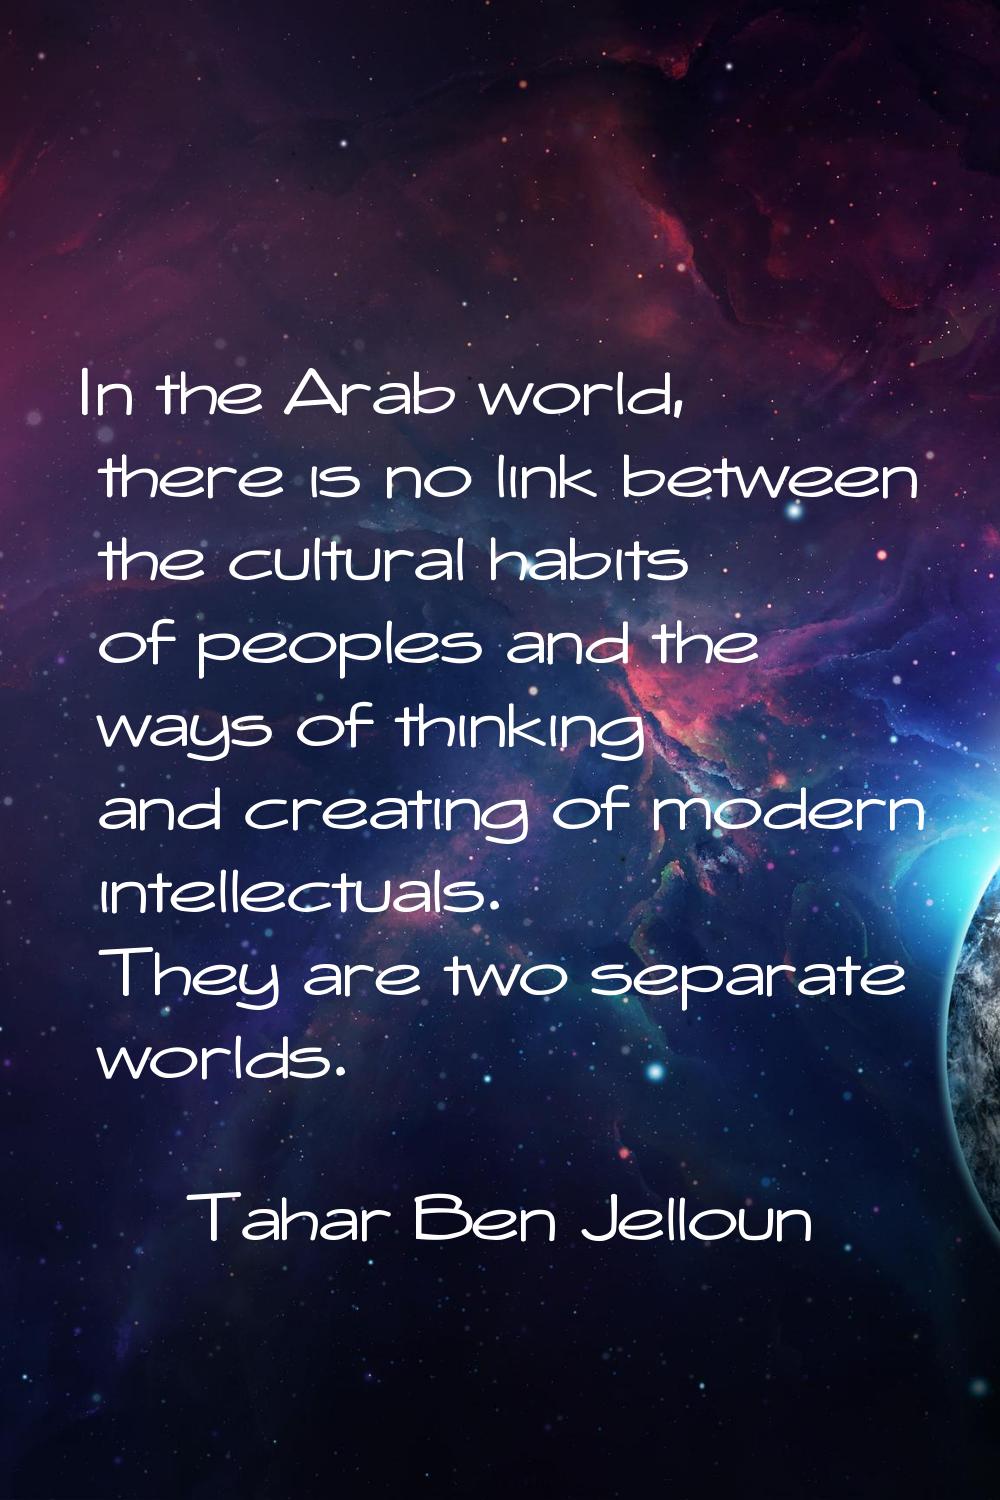 In the Arab world, there is no link between the cultural habits of peoples and the ways of thinking